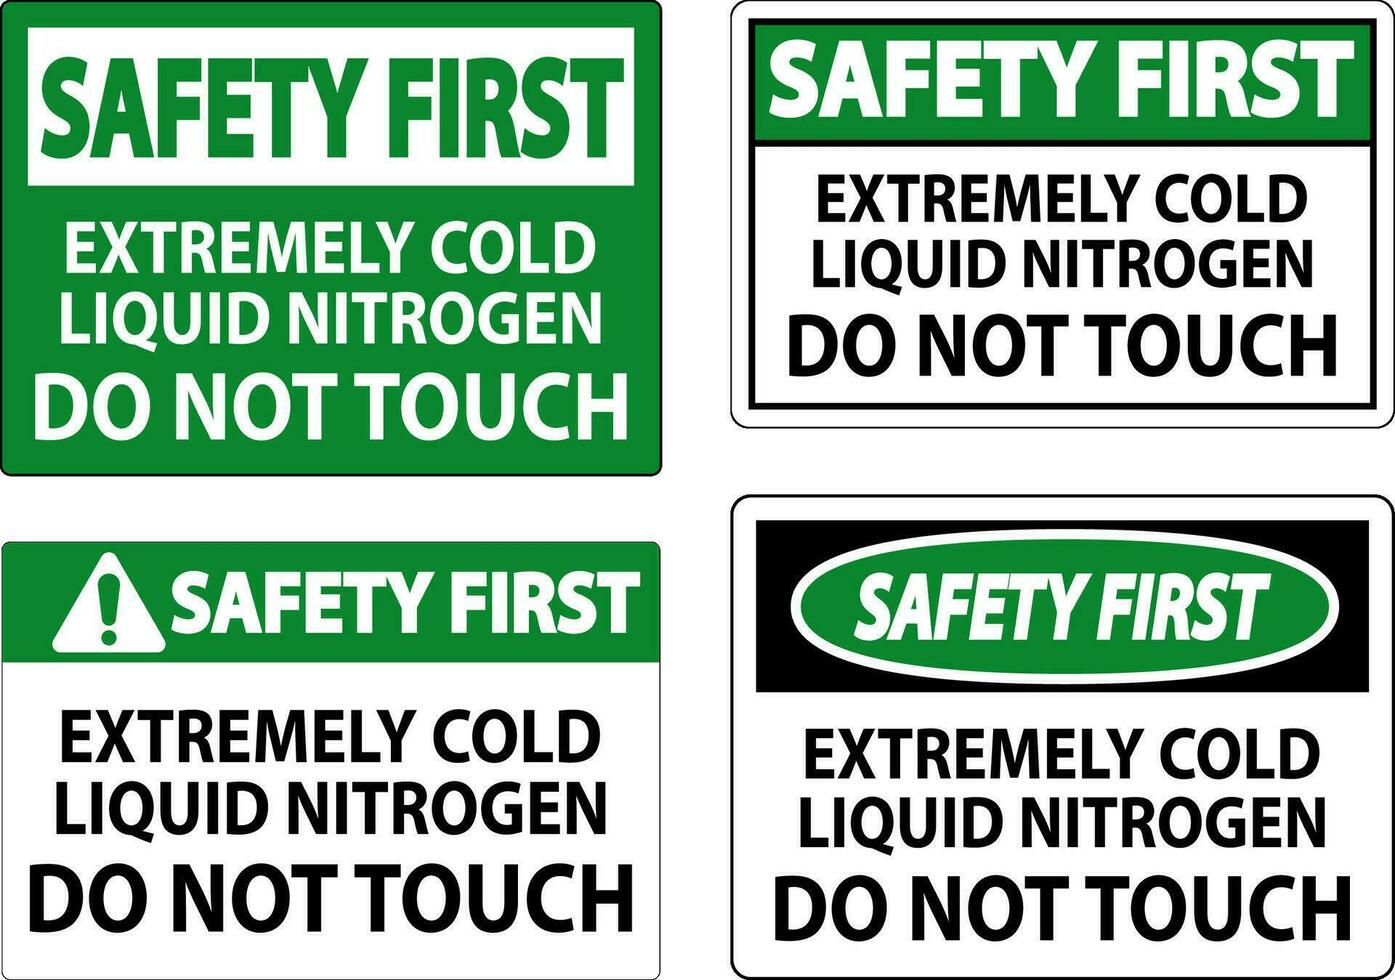 Safety First Sign Extremely Cold Liquid Nitrogen Do Not Touch vector